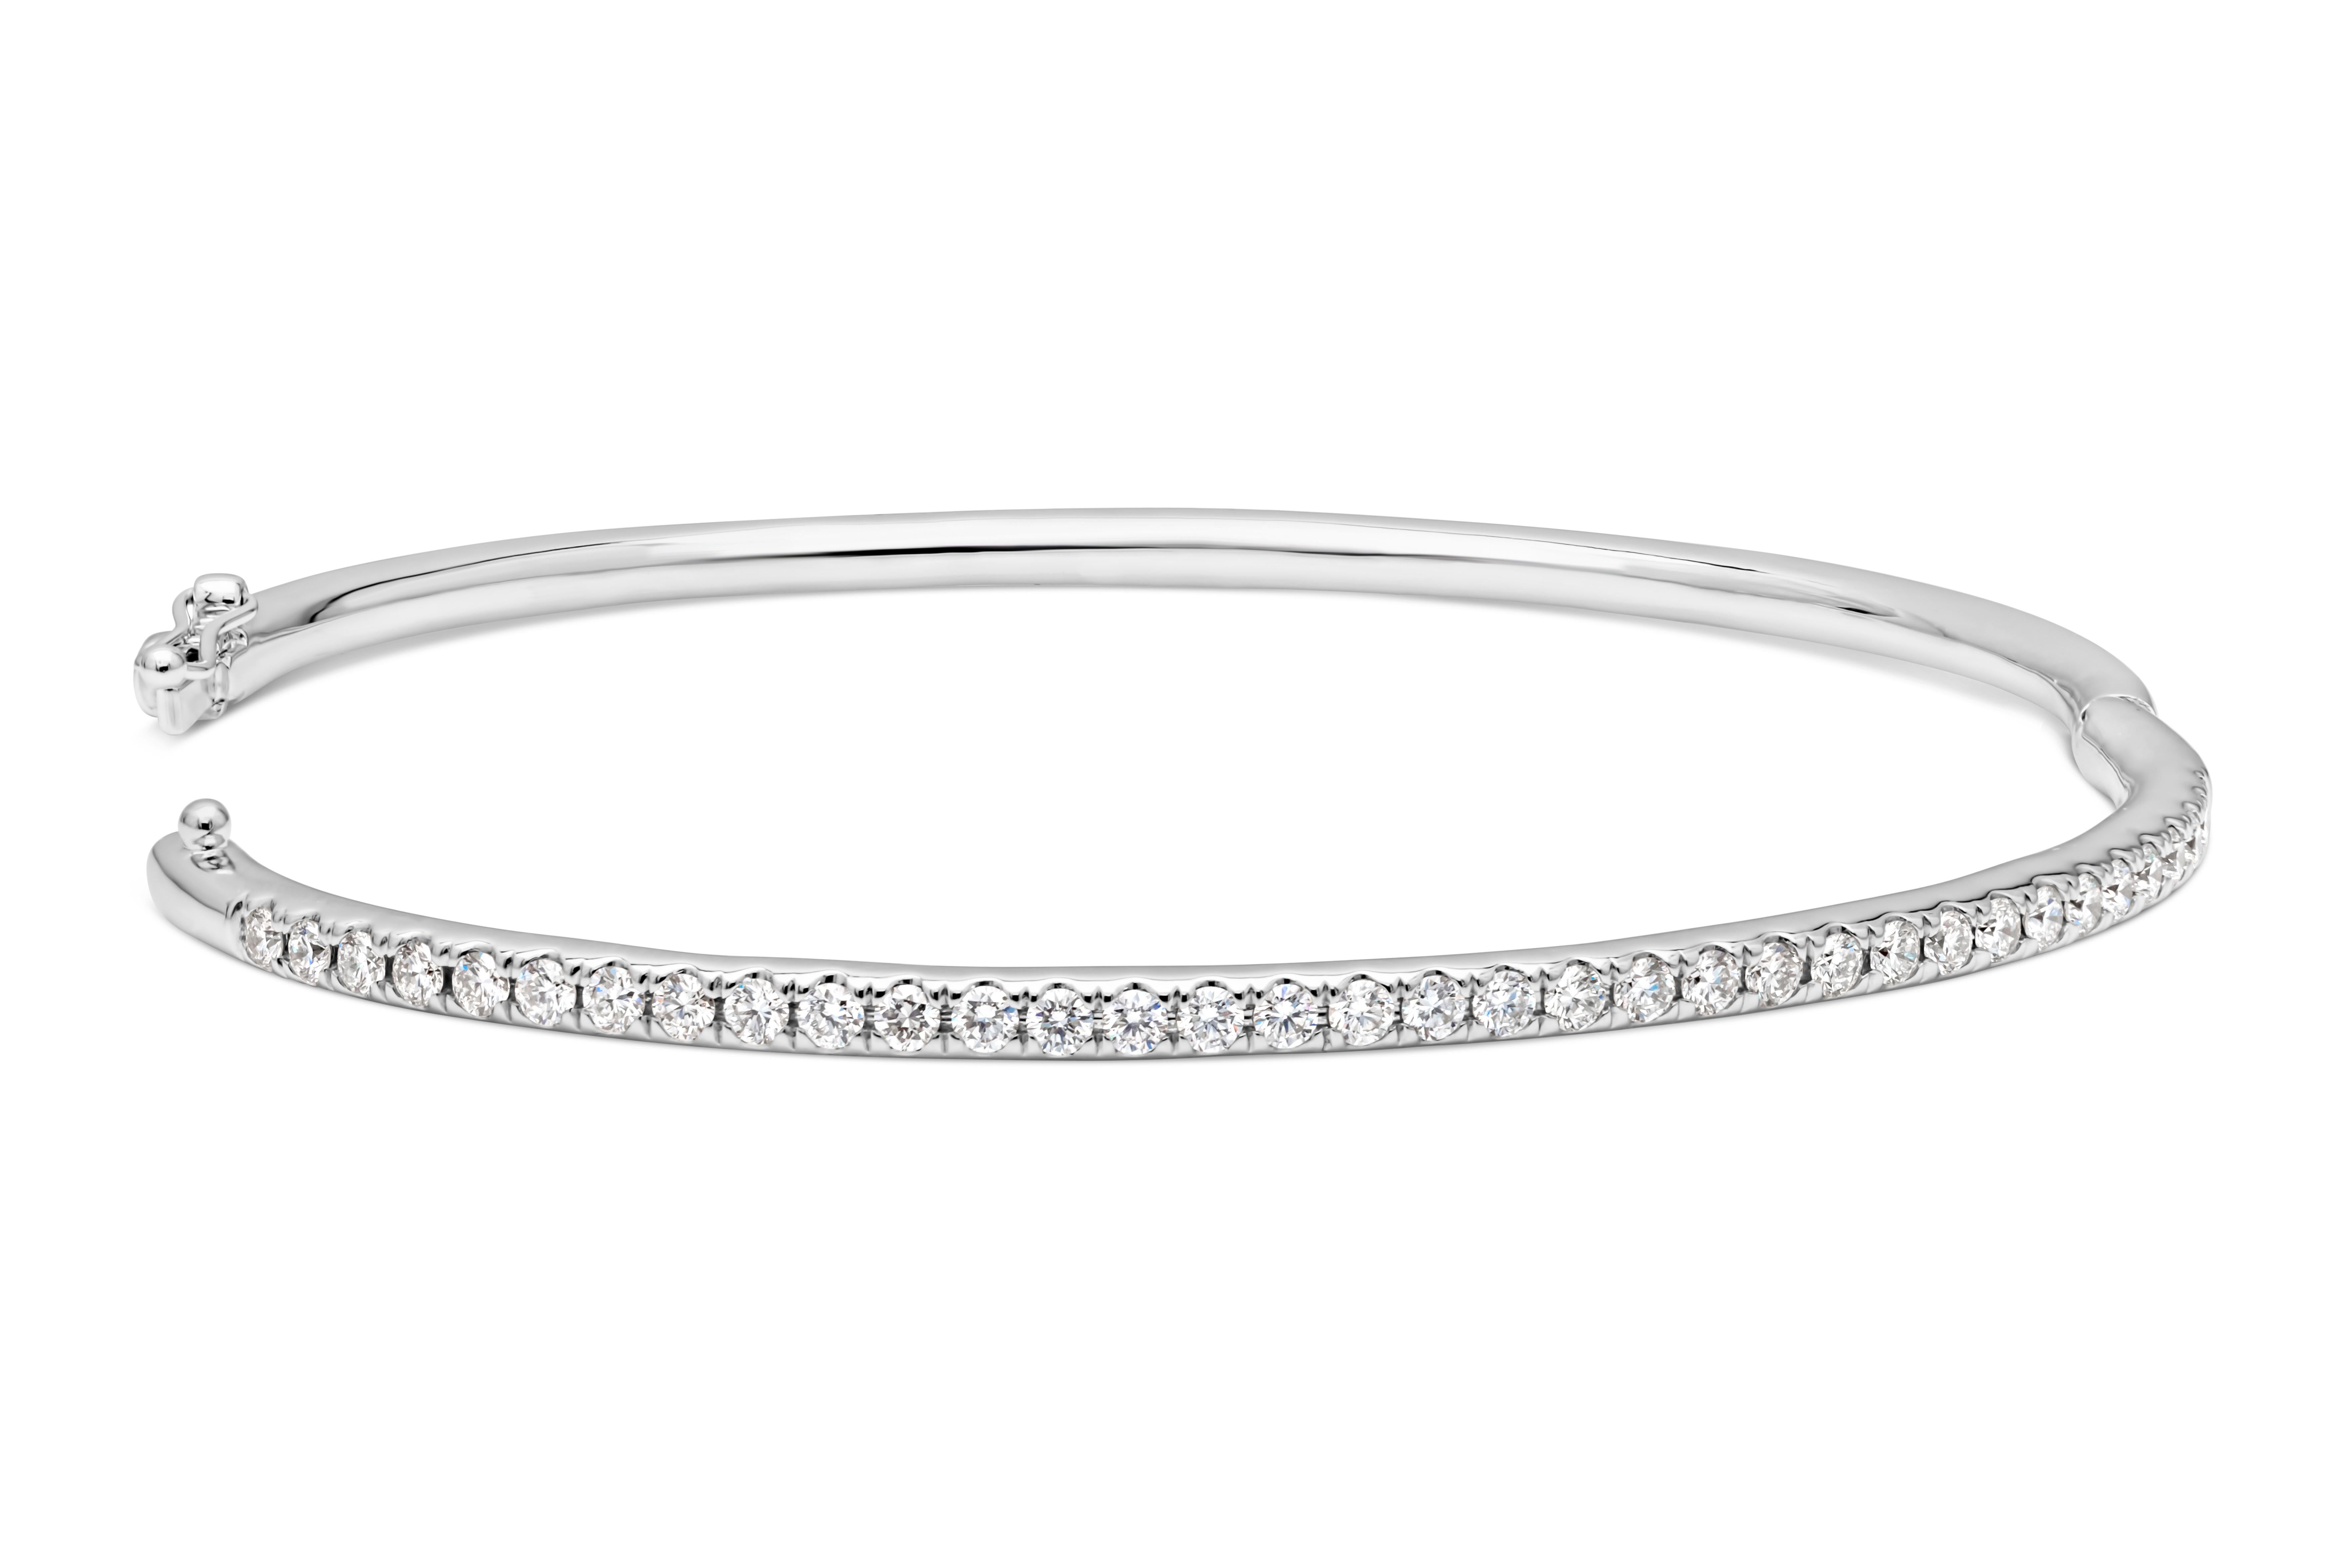 Showcasing a simple but elegant large wrist bangle bracelet set with 35 brilliant round cut diamonds weighing 1.10 carats total, F color and VS in clarity. Has a clasp to slip and wear the bangle securely. Finely made in 14K White Gold and 7.57